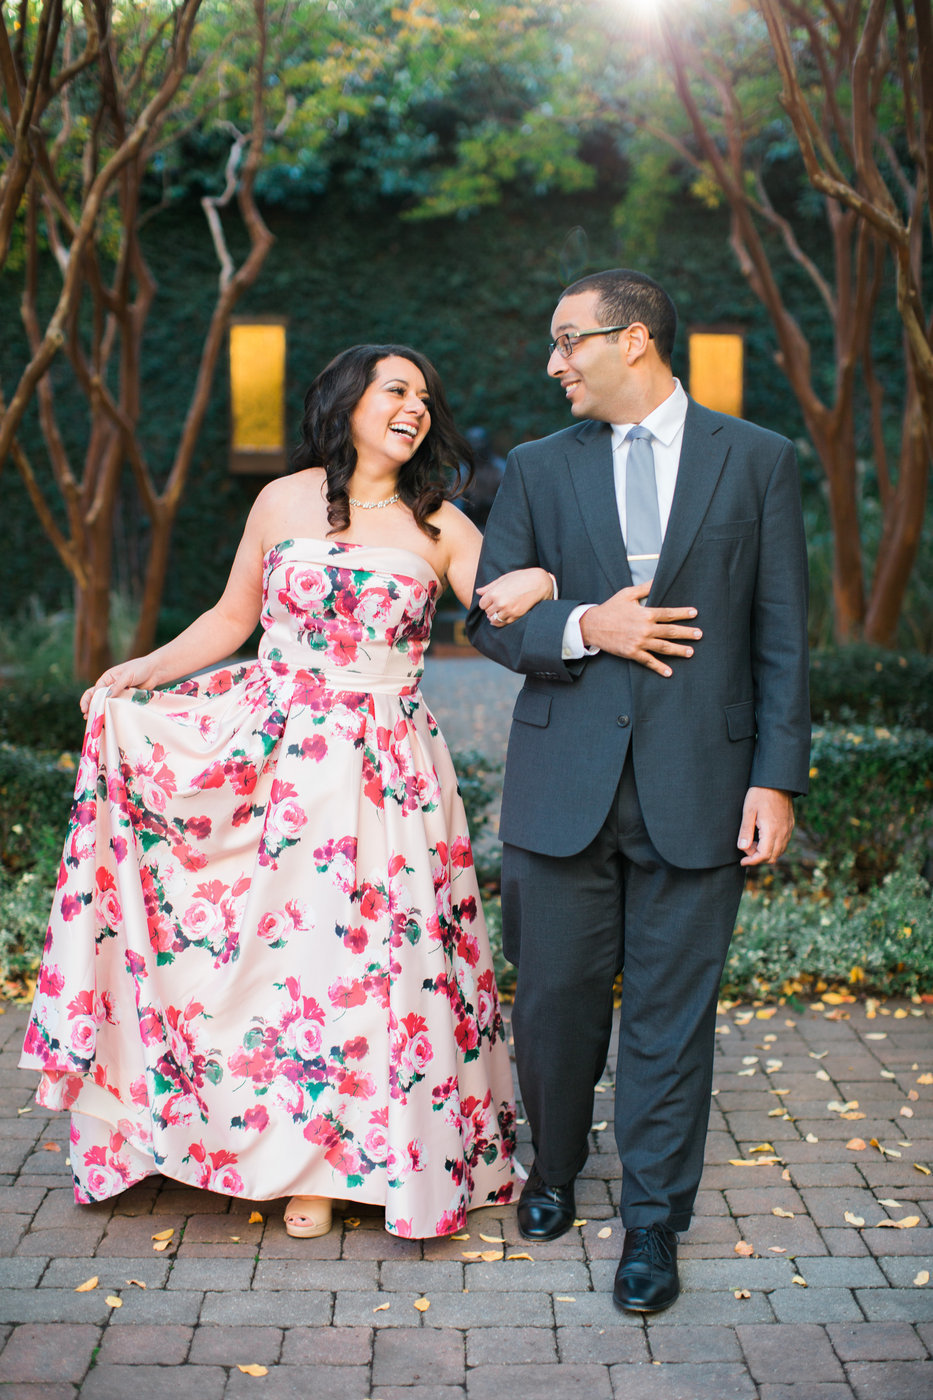 Wedding Photographer, woman in floral dressing walking arm in arm with her man